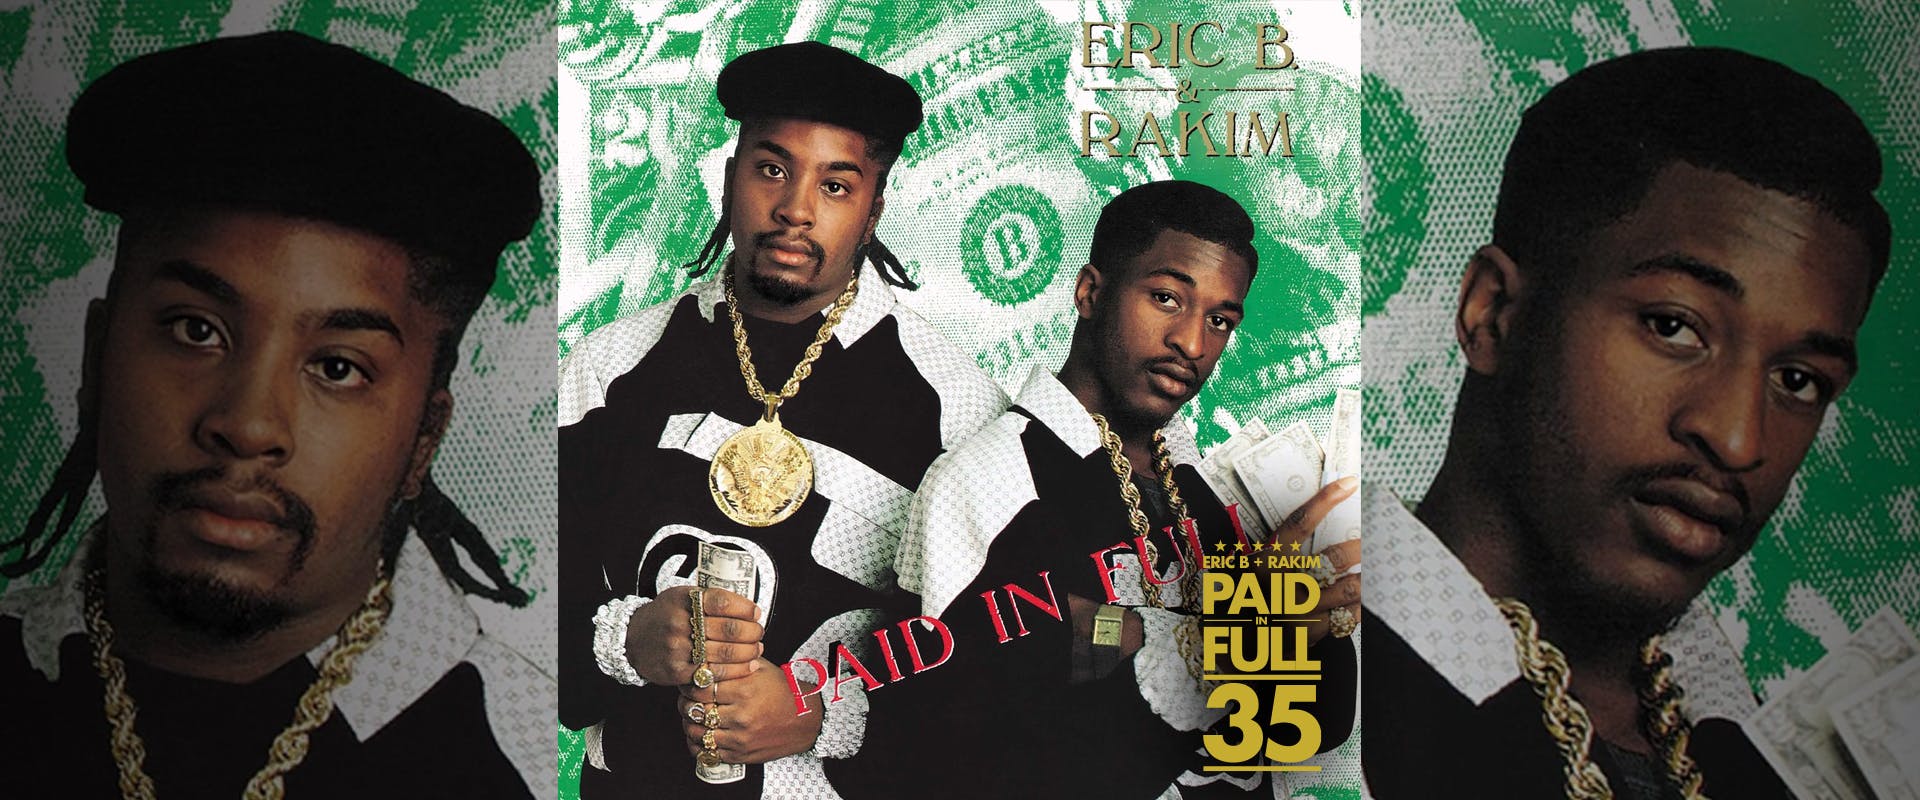 PAID IN FULL 35th ANNIVERSARY